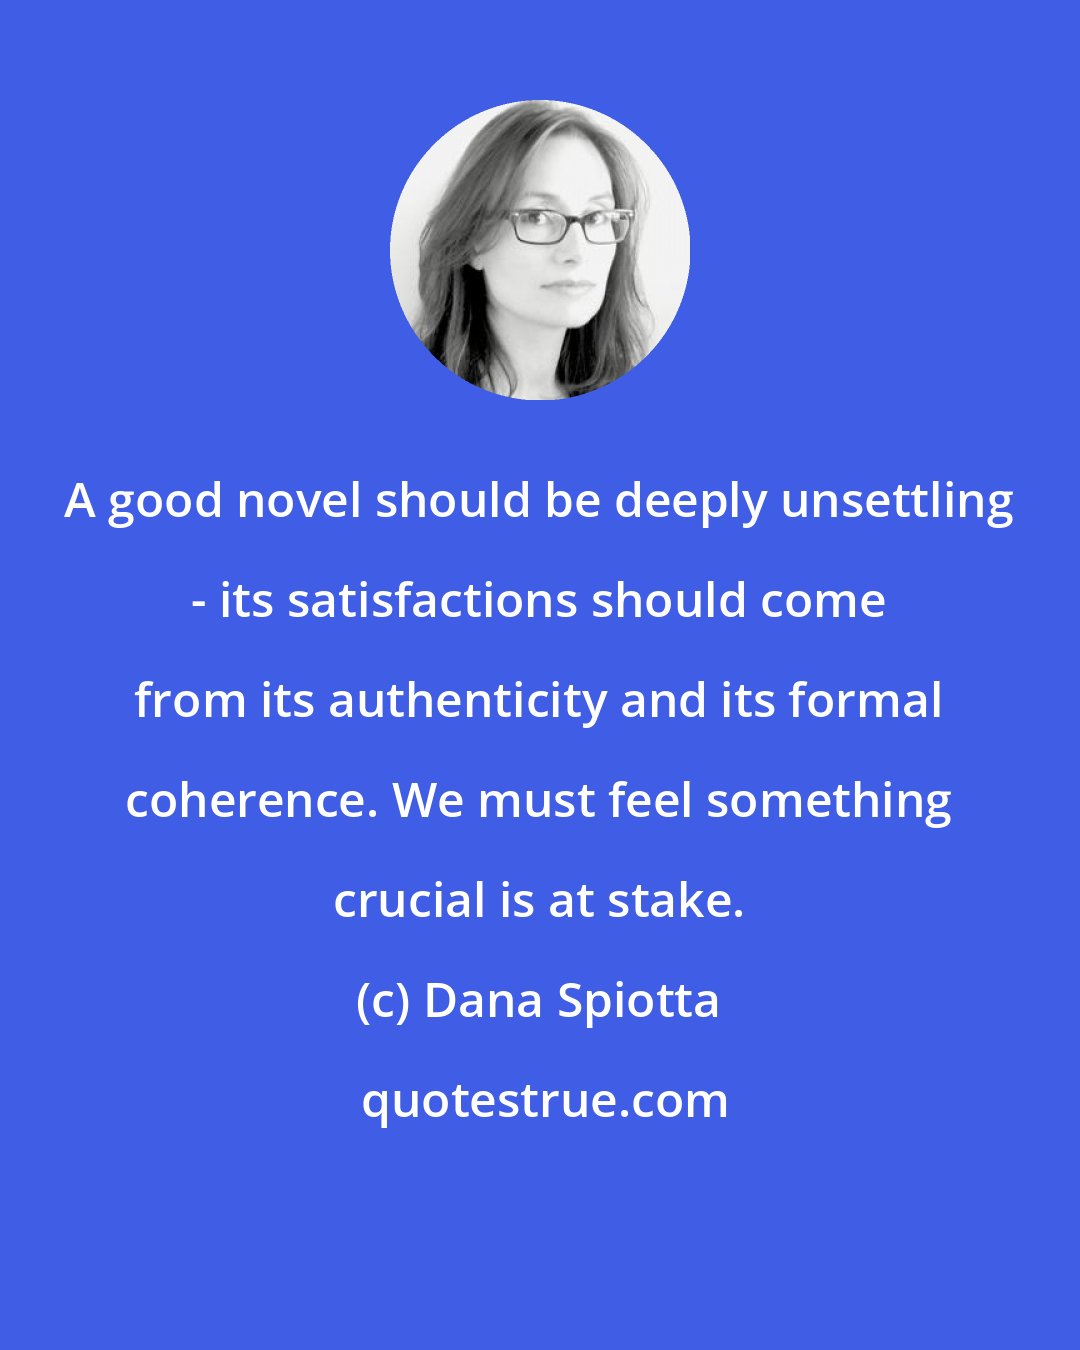 Dana Spiotta: A good novel should be deeply unsettling - its satisfactions should come from its authenticity and its formal coherence. We must feel something crucial is at stake.